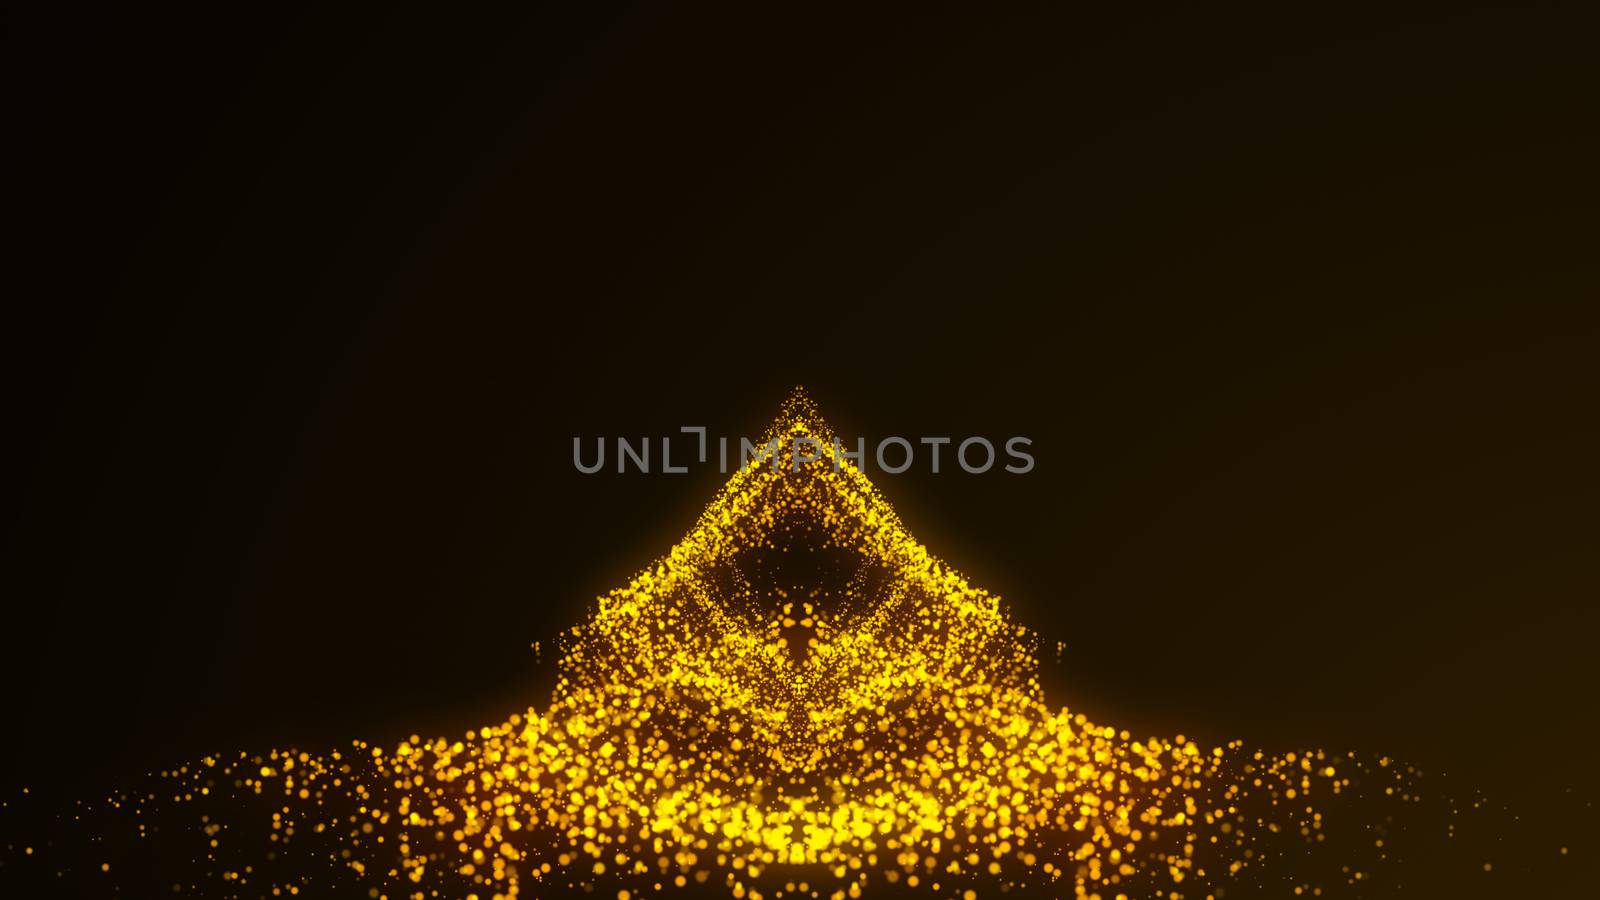 Waving particles floor. Abstract background. 3d rendering